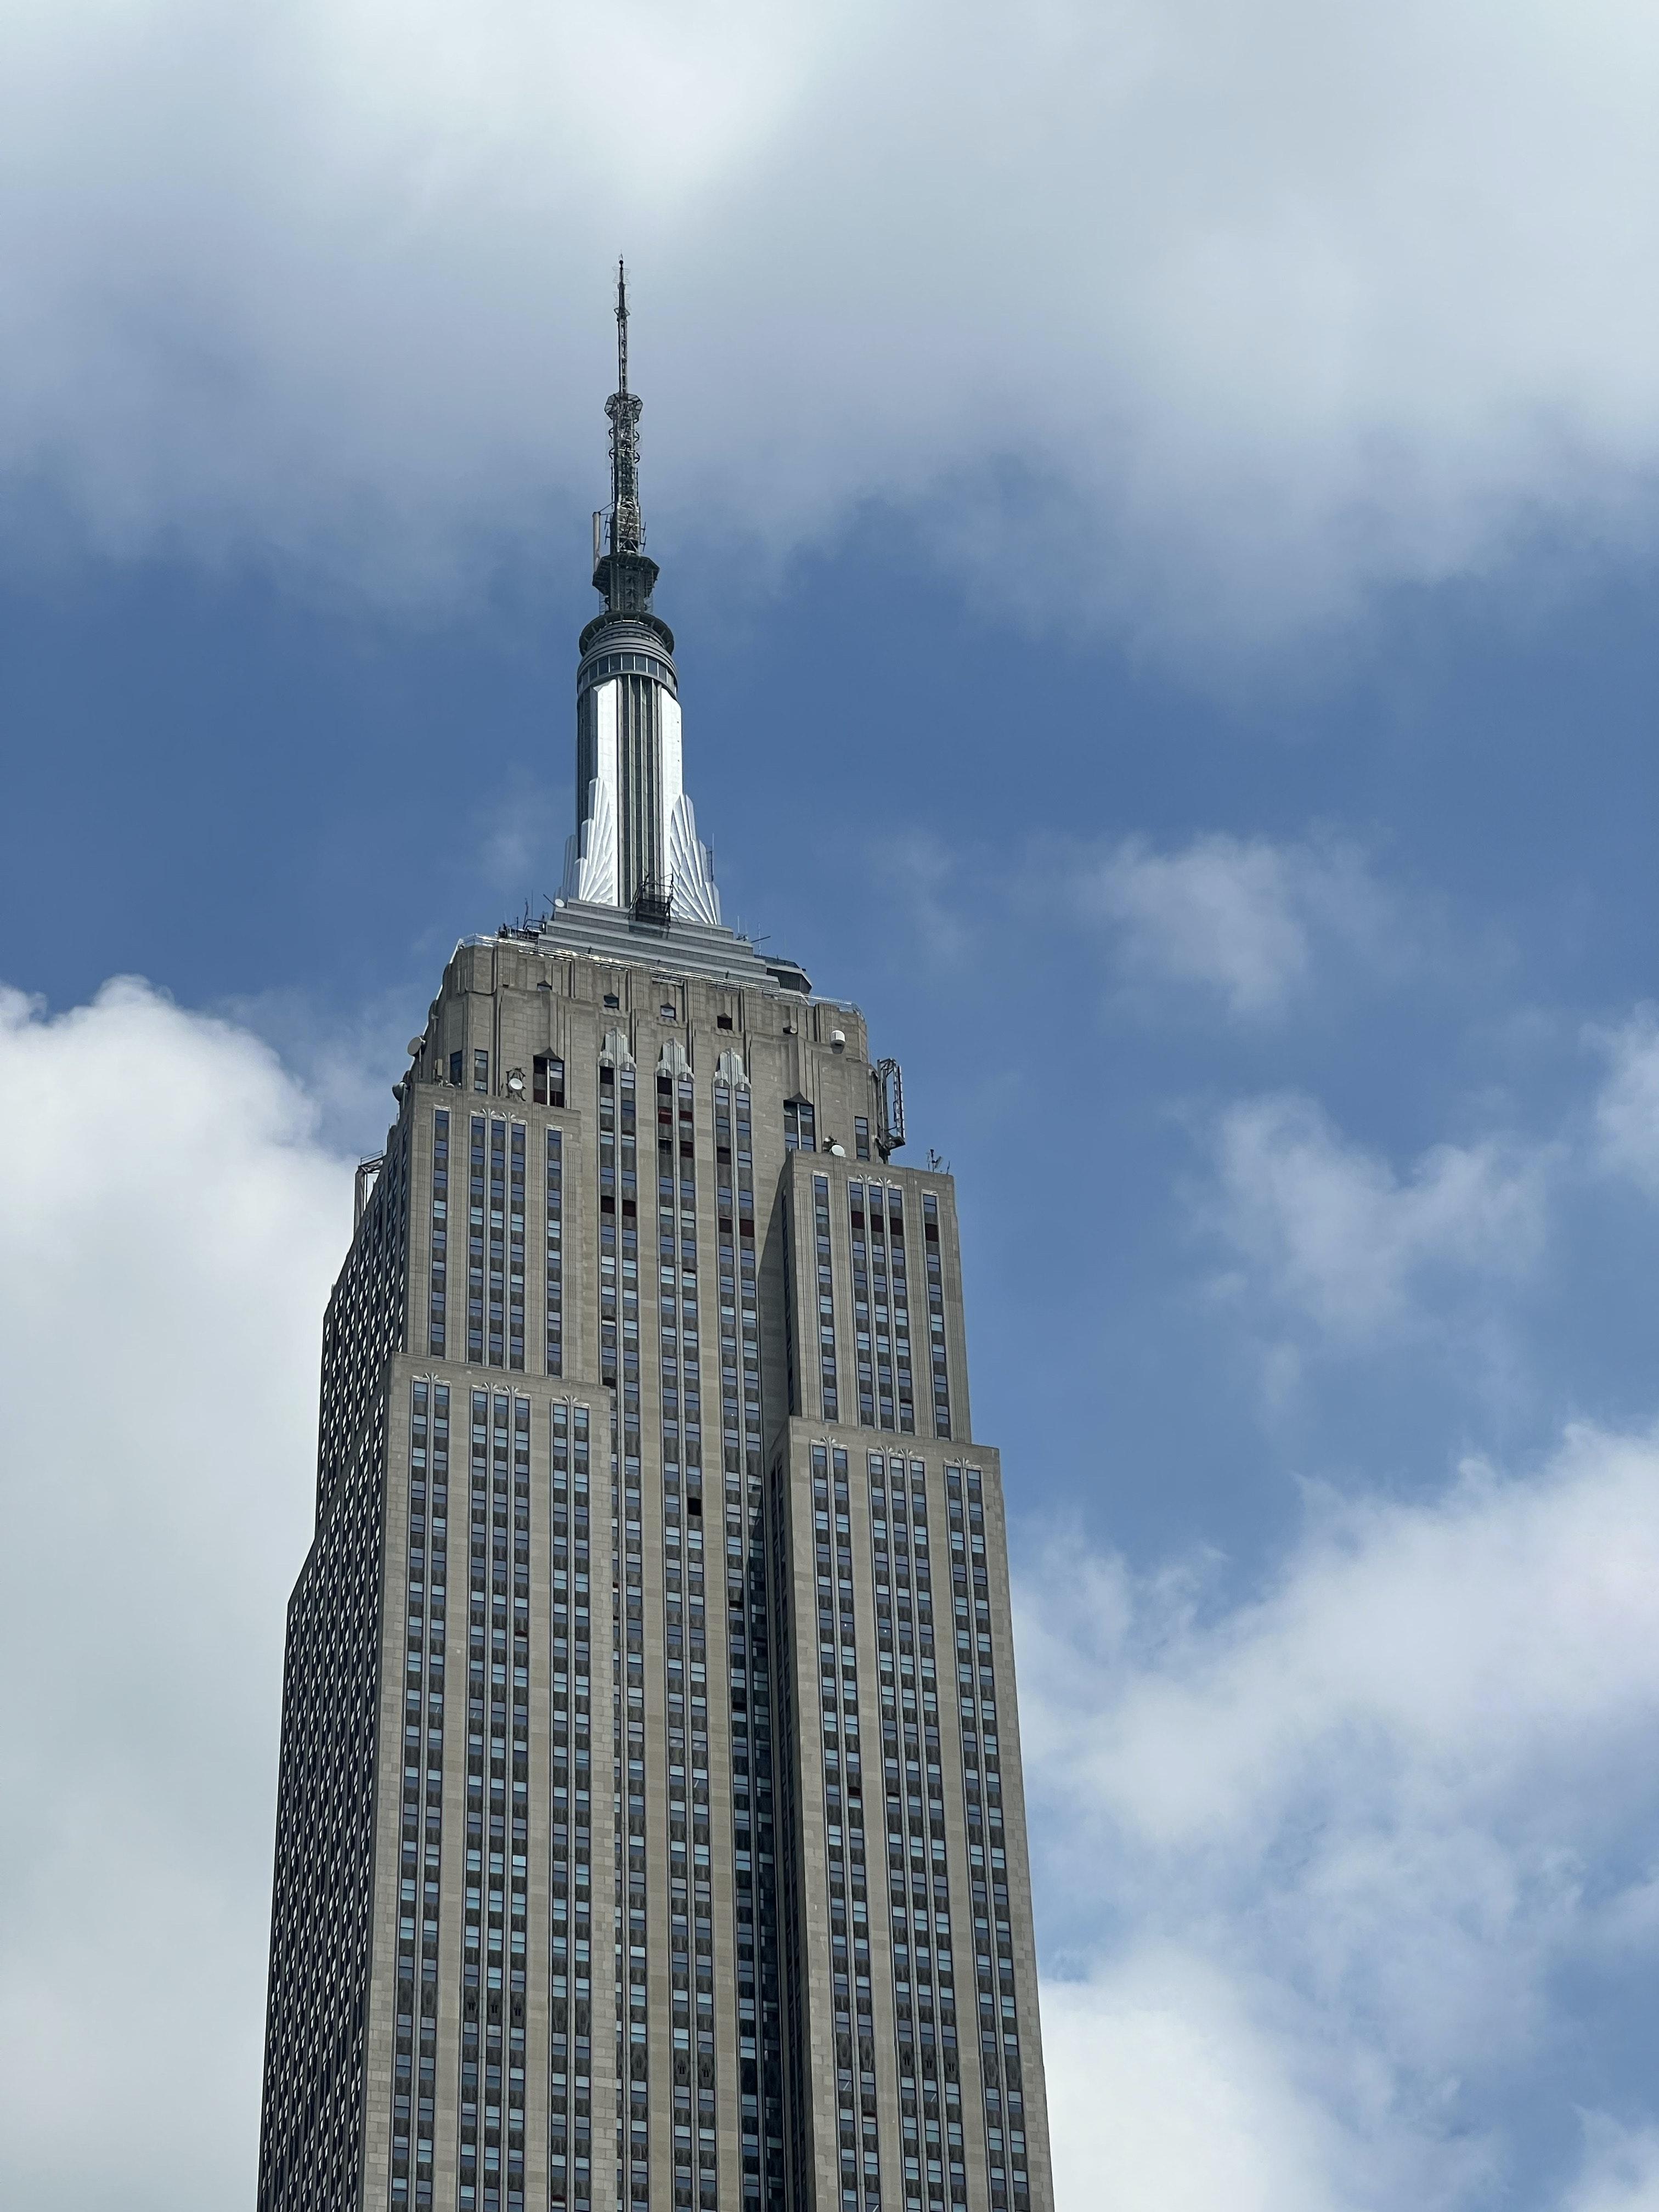 What companies are in the Empire State Building? 